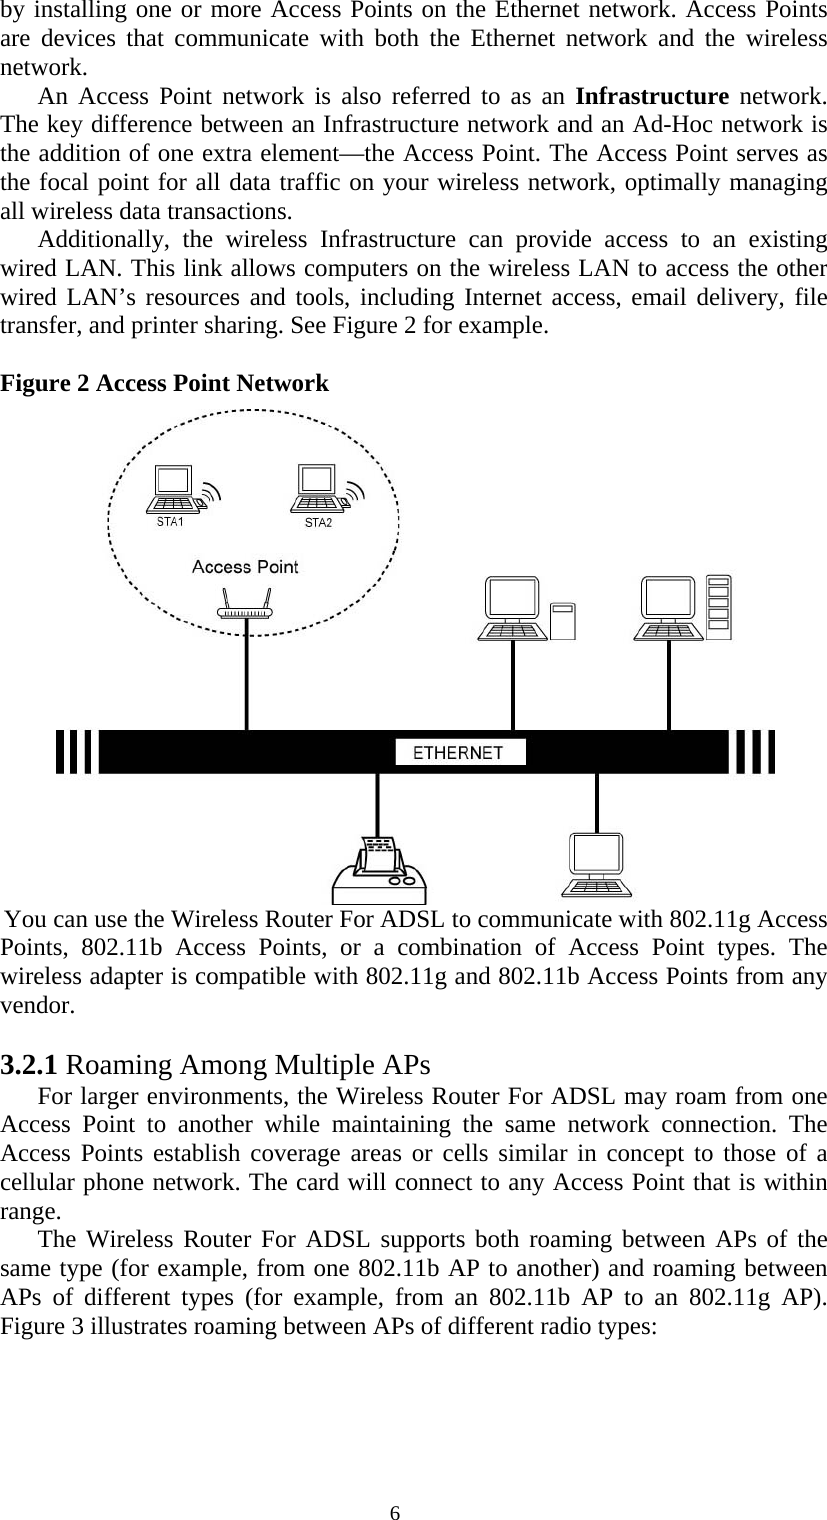   6by installing one or more Access Points on the Ethernet network. Access Points are devices that communicate with both the Ethernet network and the wireless network.  An Access Point network is also referred to as an Infrastructure network. The key difference between an Infrastructure network and an Ad-Hoc network is the addition of one extra element—the Access Point. The Access Point serves as the focal point for all data traffic on your wireless network, optimally managing all wireless data transactions.  Additionally, the wireless Infrastructure can provide access to an existing wired LAN. This link allows computers on the wireless LAN to access the other wired LAN’s resources and tools, including Internet access, email delivery, file transfer, and printer sharing. See Figure 2 for example.   Figure 2 Access Point Network  You can use the Wireless Router For ADSL to communicate with 802.11g Access Points, 802.11b Access Points, or a combination of Access Point types. The wireless adapter is compatible with 802.11g and 802.11b Access Points from any vendor.  3.2.1 Roaming Among Multiple APs For larger environments, the Wireless Router For ADSL may roam from one Access Point to another while maintaining the same network connection. The Access Points establish coverage areas or cells similar in concept to those of a cellular phone network. The card will connect to any Access Point that is within range. The Wireless Router For ADSL supports both roaming between APs of the same type (for example, from one 802.11b AP to another) and roaming between APs of different types (for example, from an 802.11b AP to an 802.11g AP). Figure 3 illustrates roaming between APs of different radio types: 